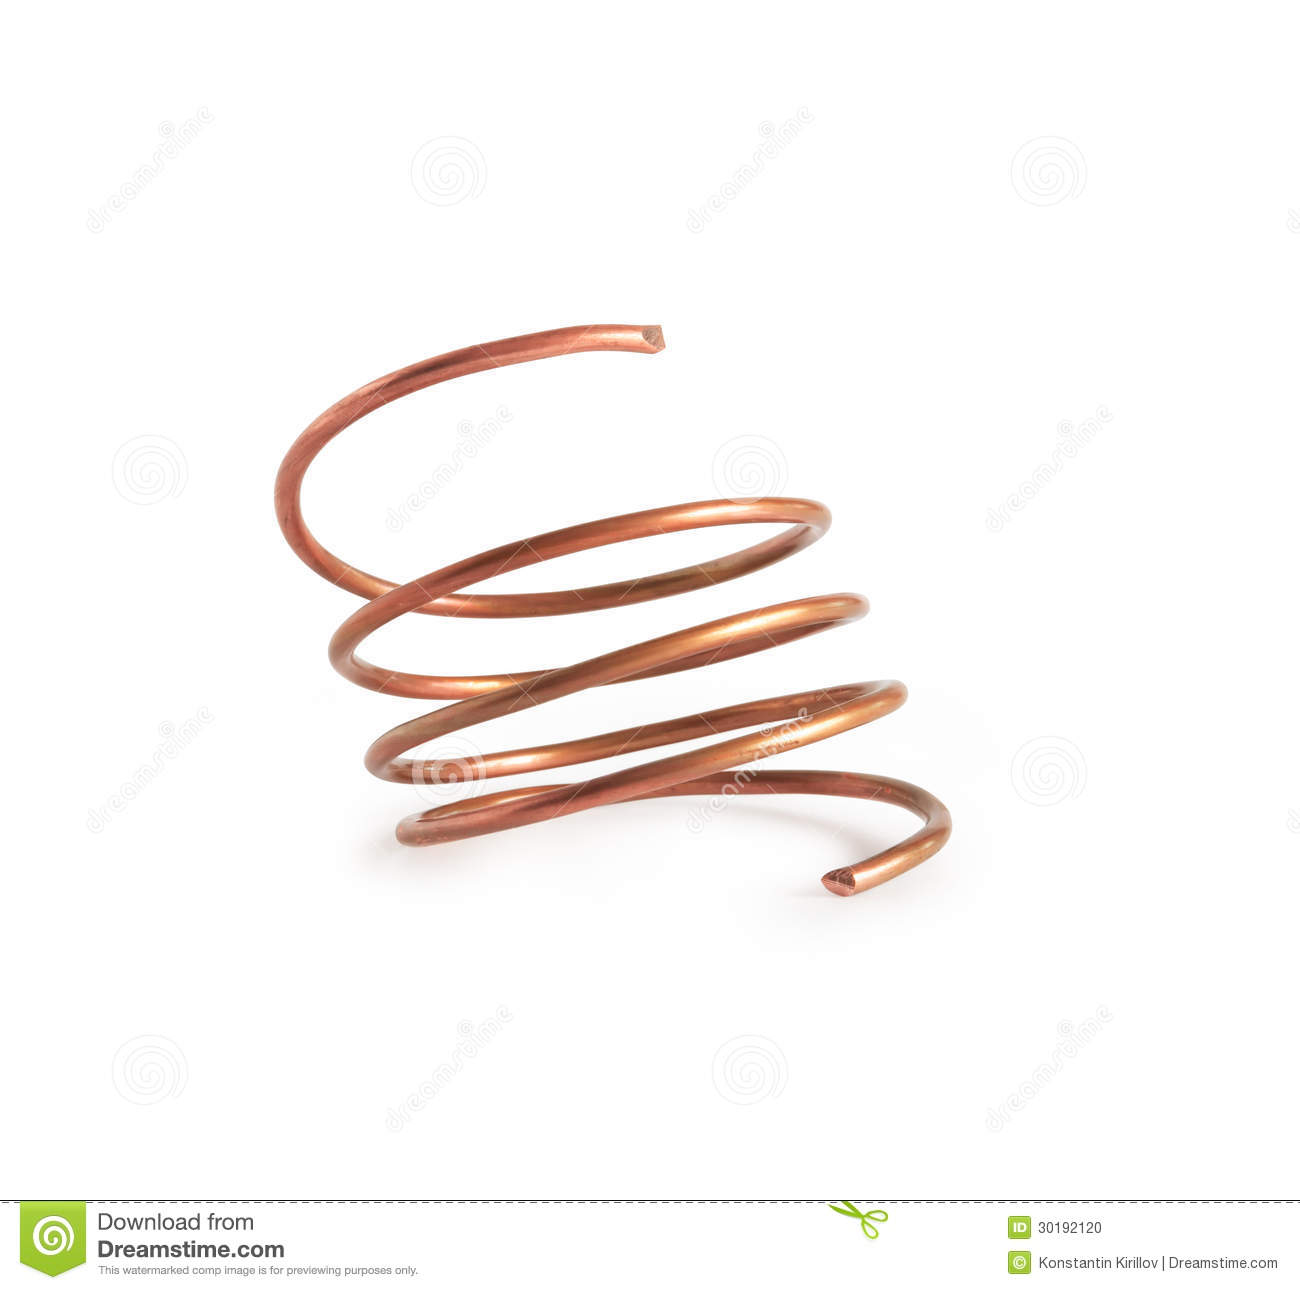 Copper Wire Spring On White Background  Clipping Path Is Included 